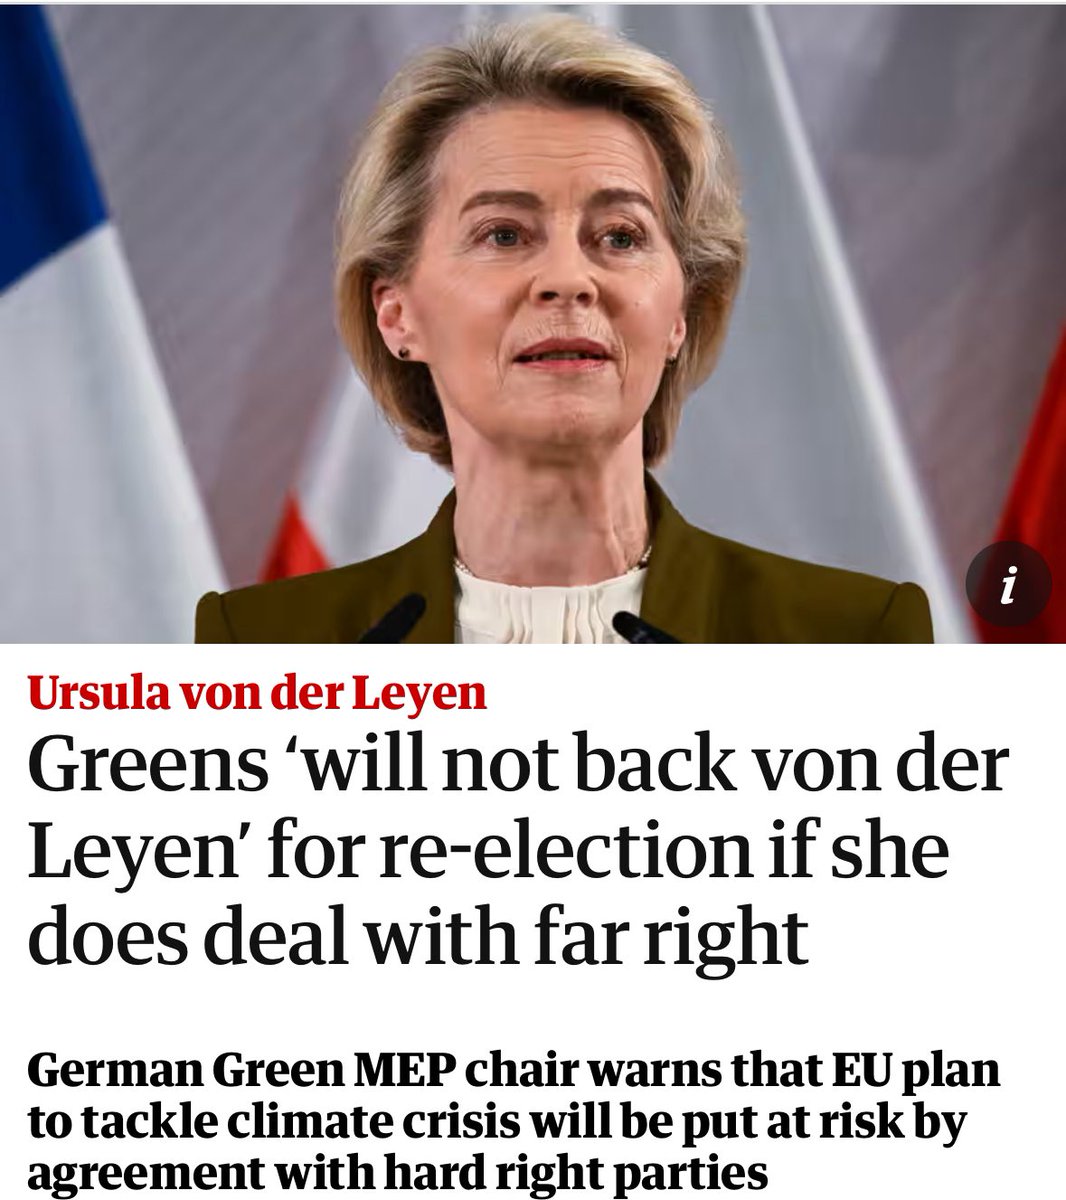 It has become clear for everybody by now. On June 10th, Europe can wake up in two different worlds. One with the far-right in power. One with democracy, freedom and a green and social deal. And if you like the second most, the green vote is the best chance to achieve it. 💚✊🏽